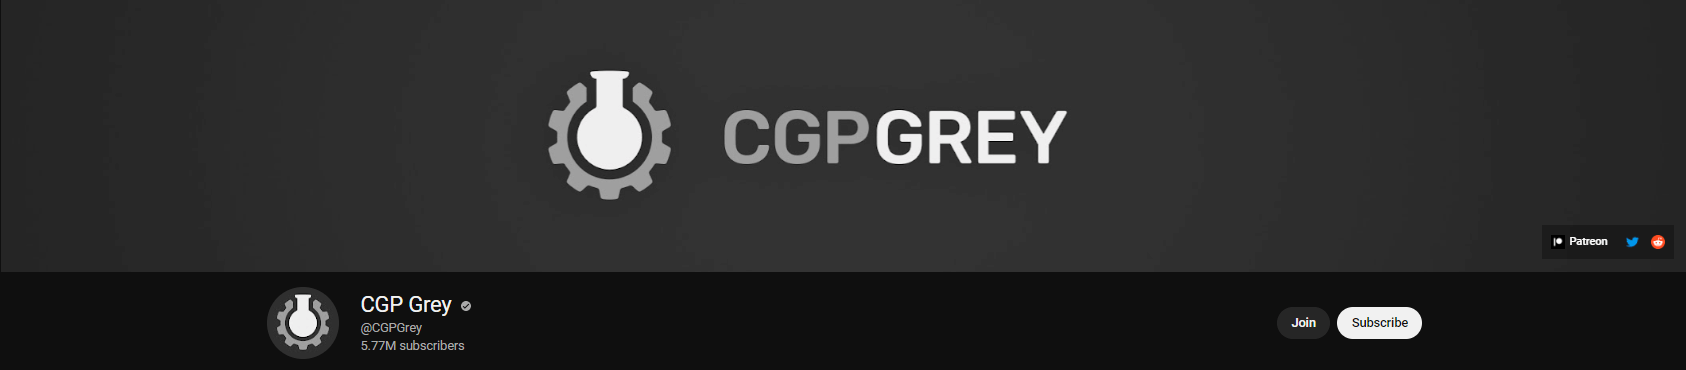 C.G.P. Grey YouTube Channel